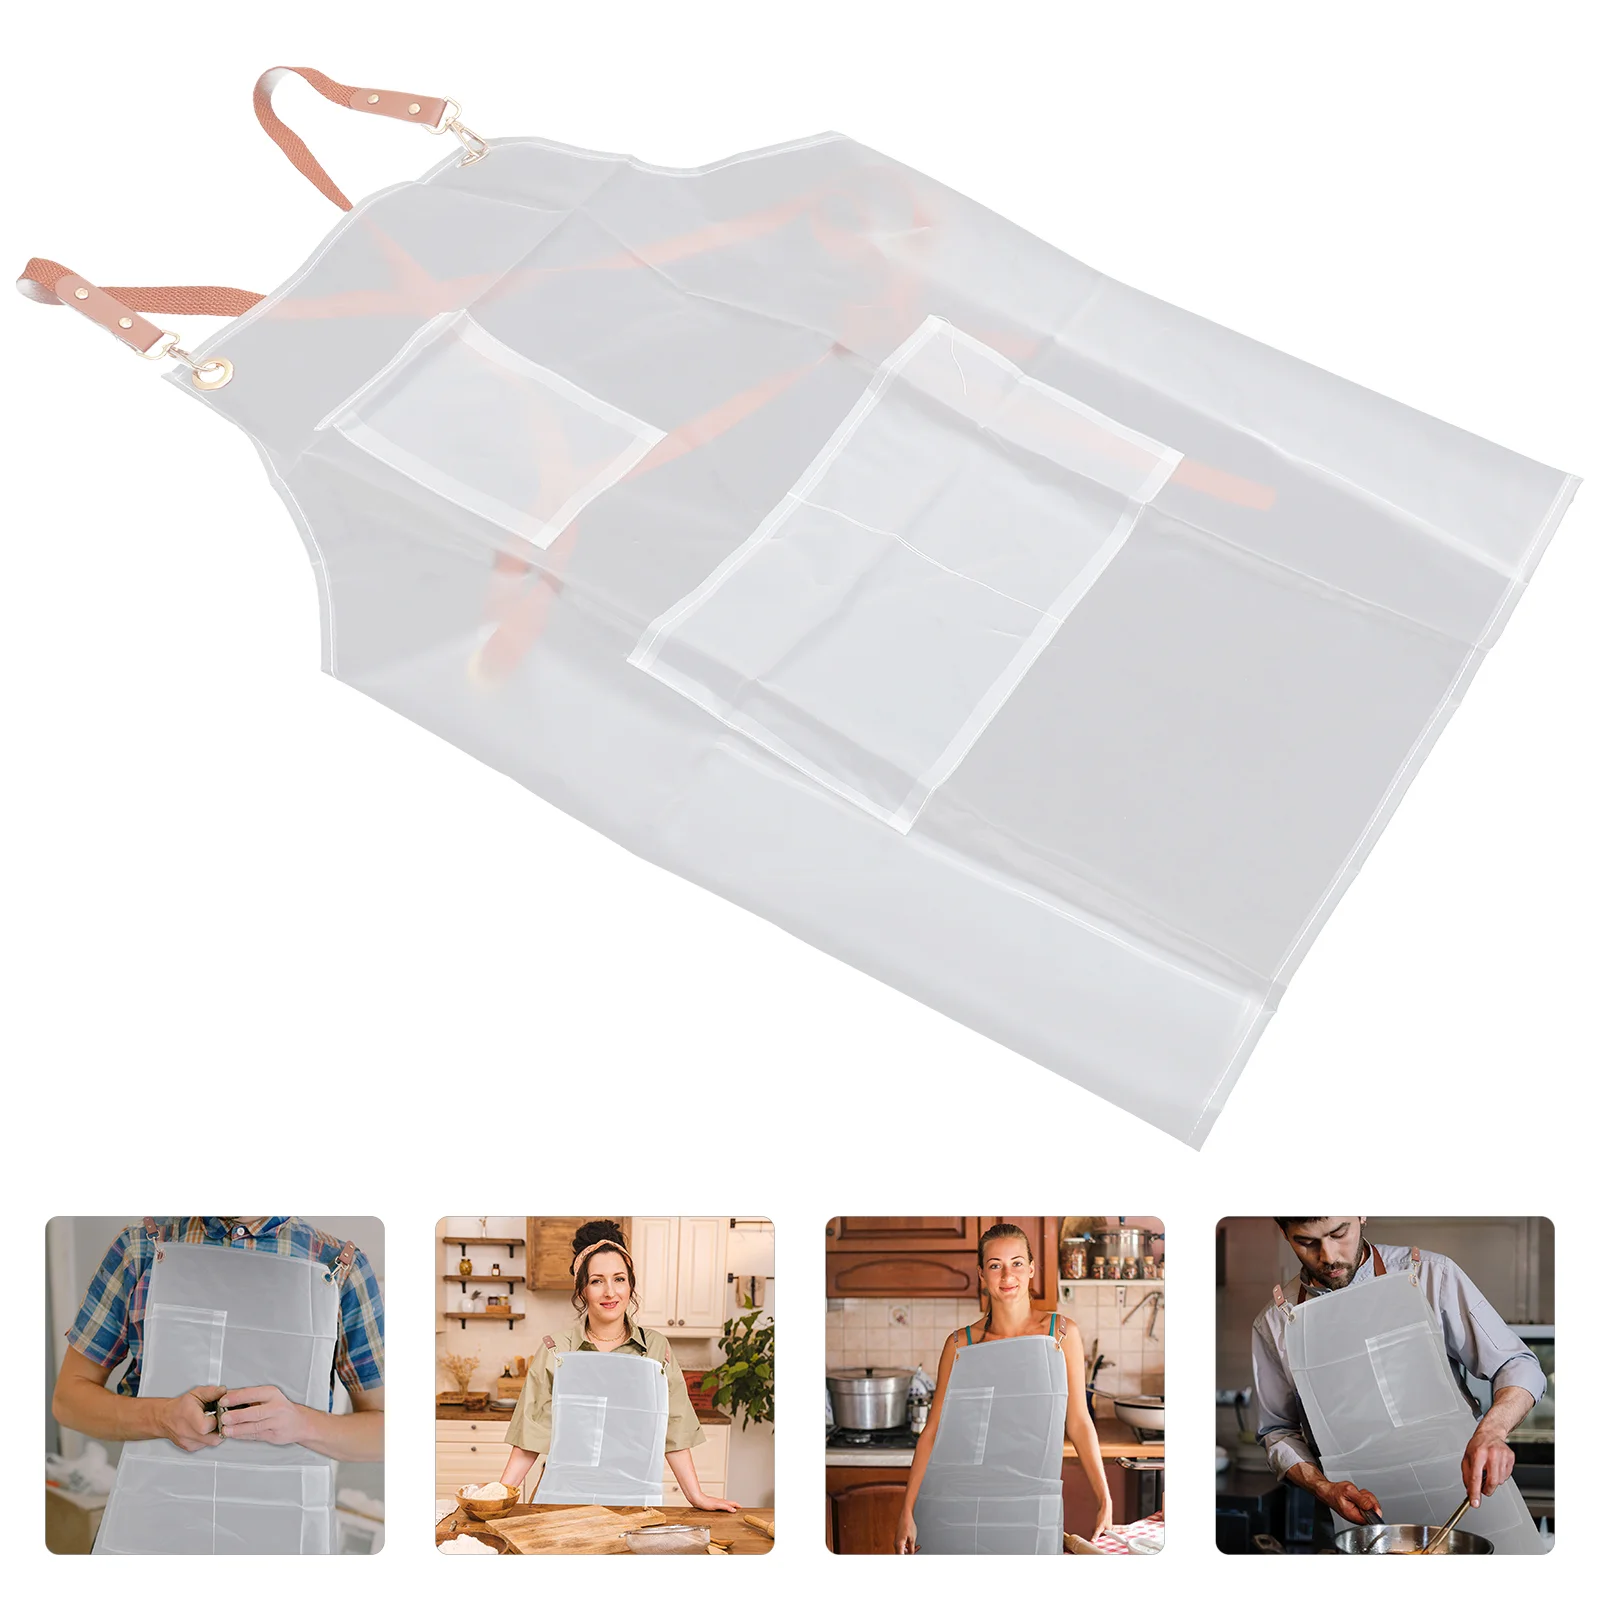 

No-wash Household Kitchen Oil-proof Work Apron Grooming Hair Stylist Cute TPU Clear Water Aprons for Men